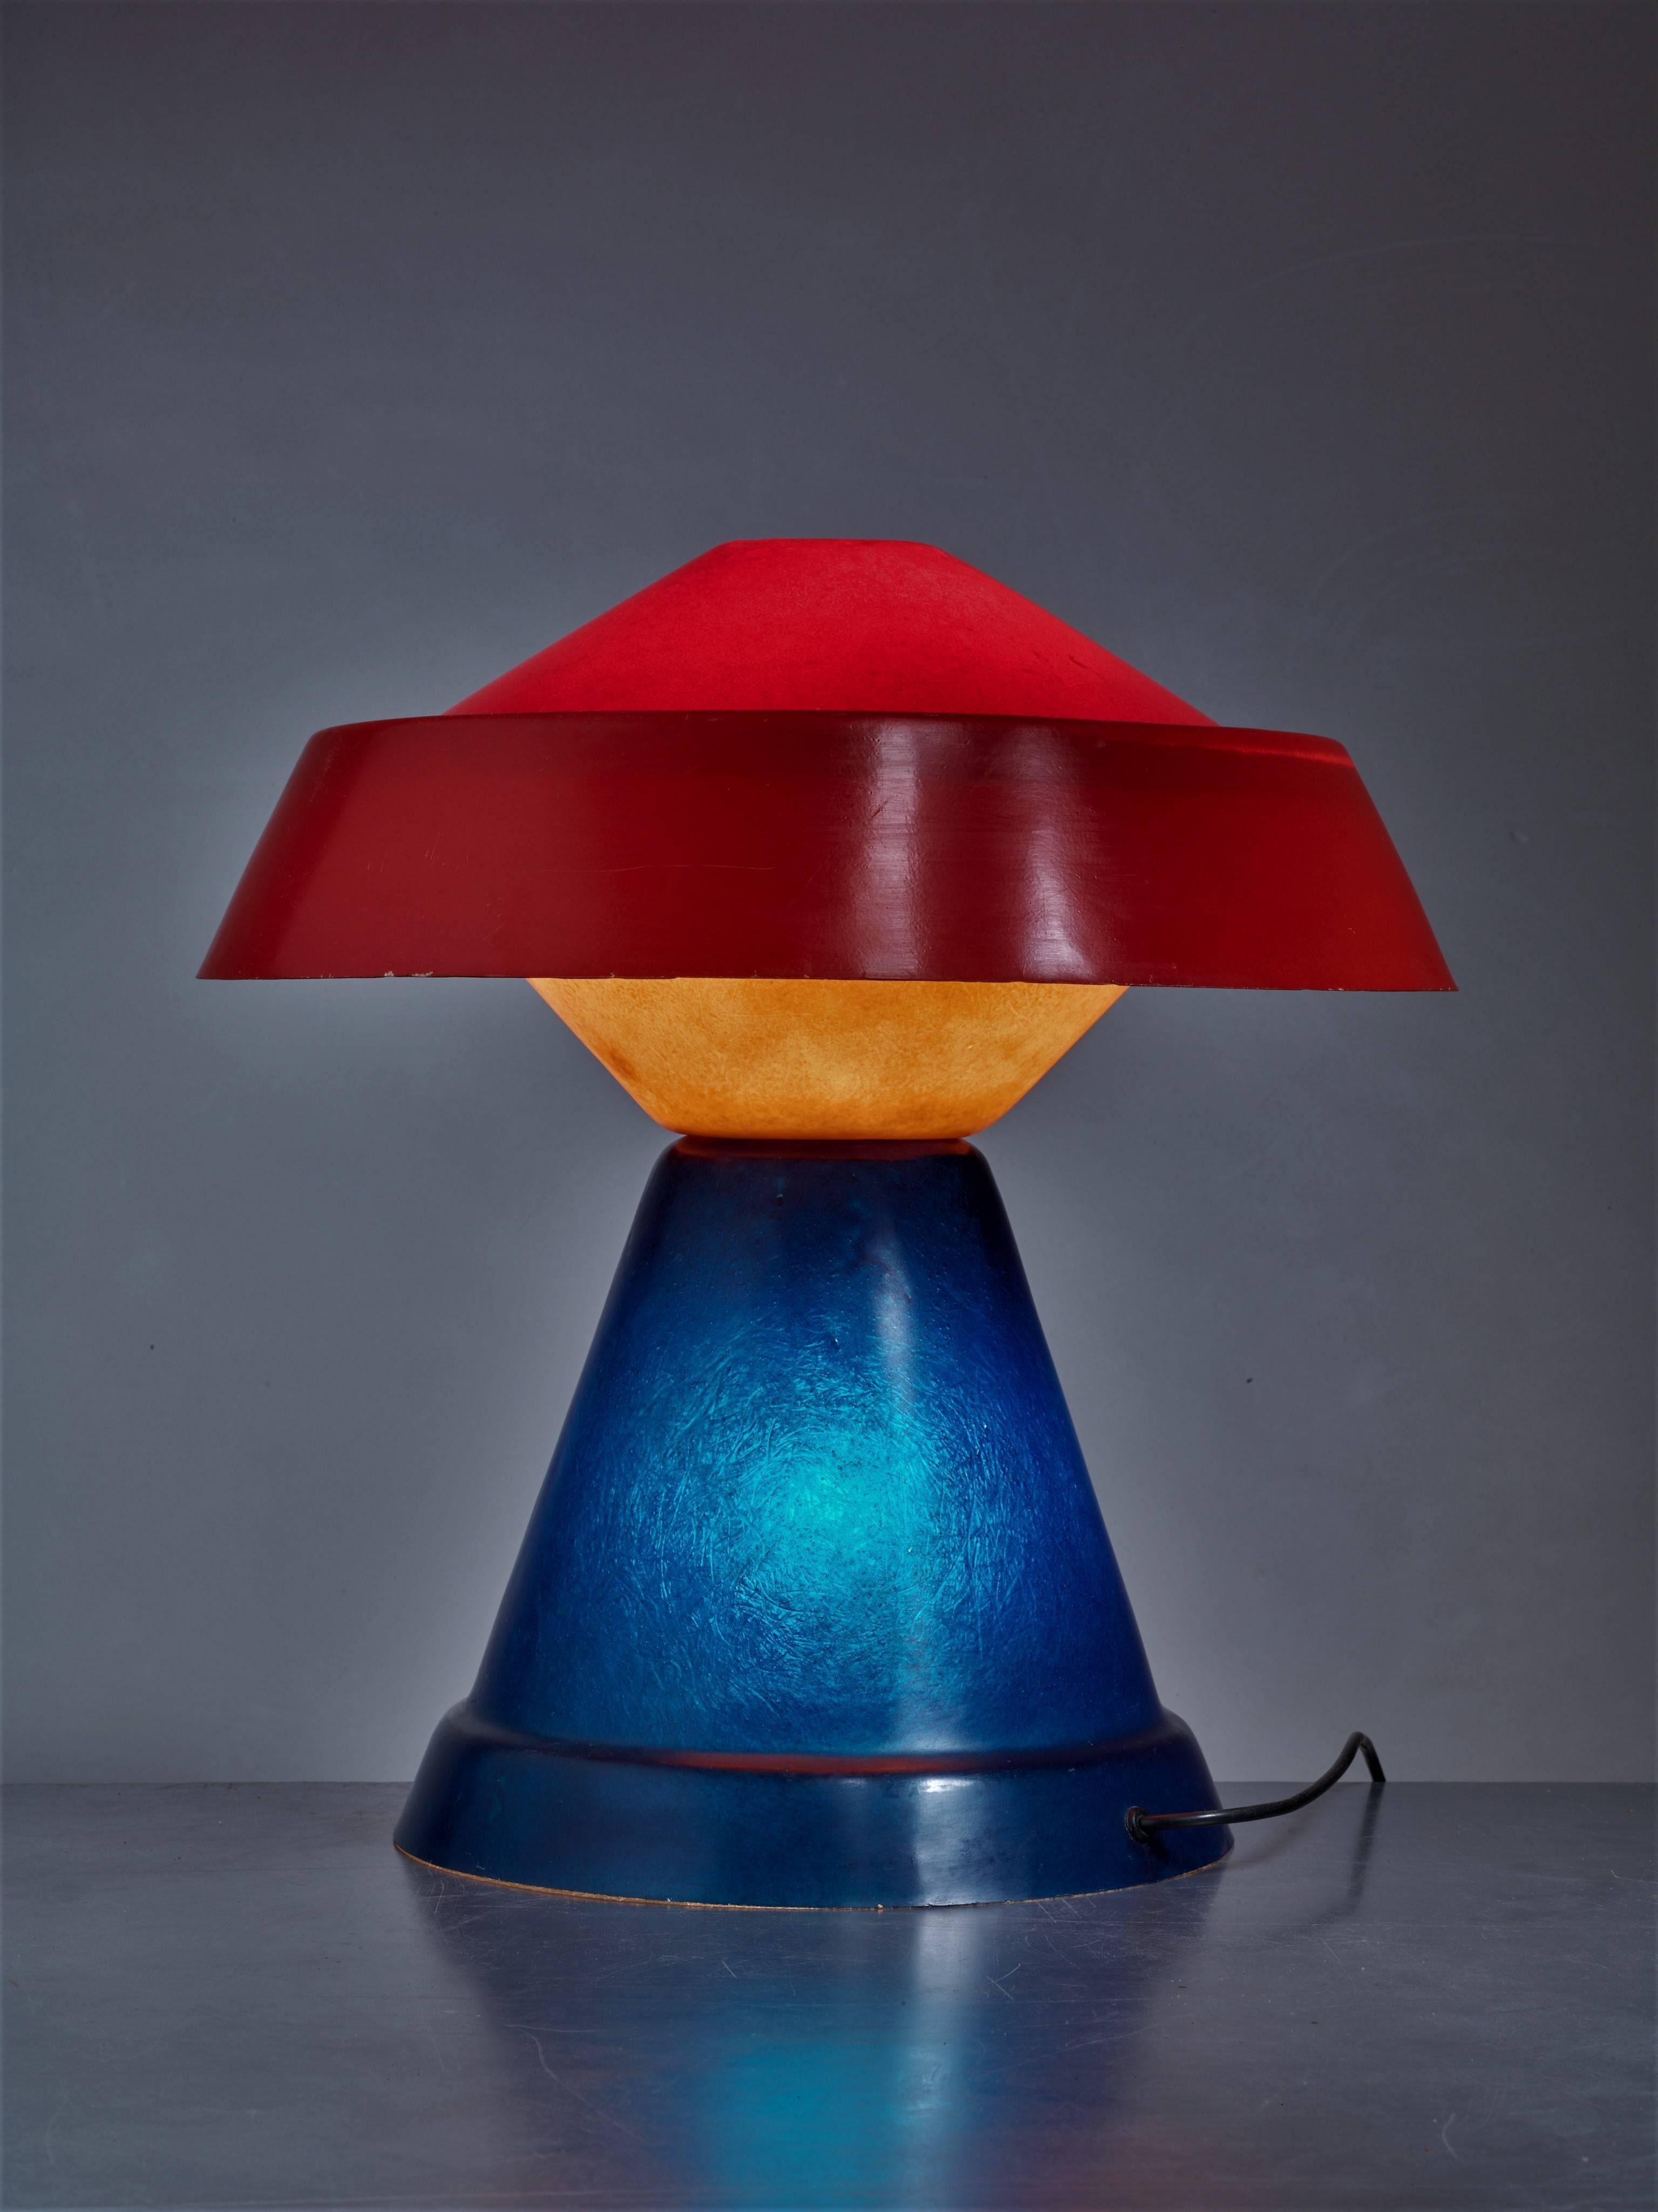 A very rare table lamp in blue, yellow and red polyester, by Italian architect and designer Umberto Riva for VeArt. The lamp was published in Domus 520, March 1973. An absolute eyecatcher in a perfect condition.